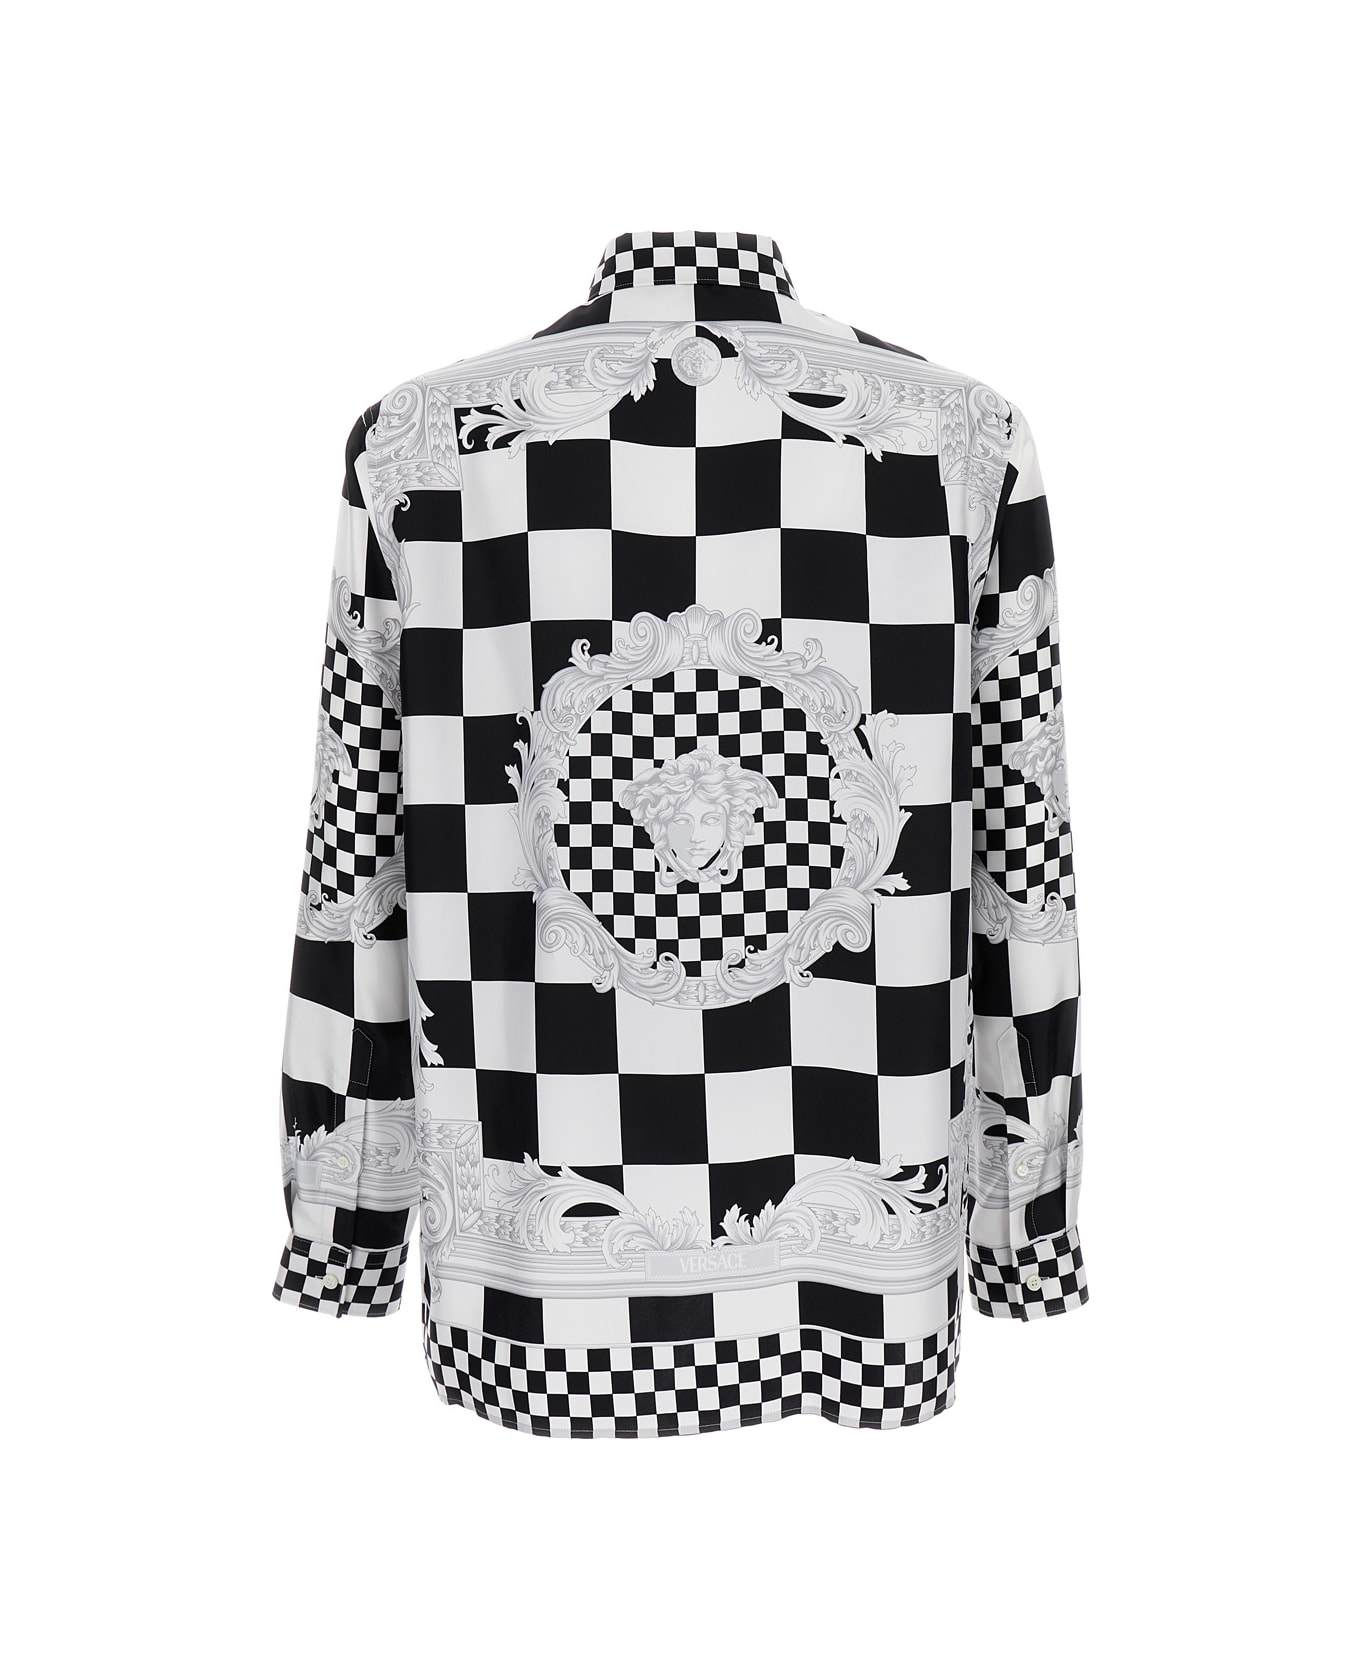 Versace Black And White Chechered Shirt With Baroque Pattern And Medusa Heas In Silk Man - White